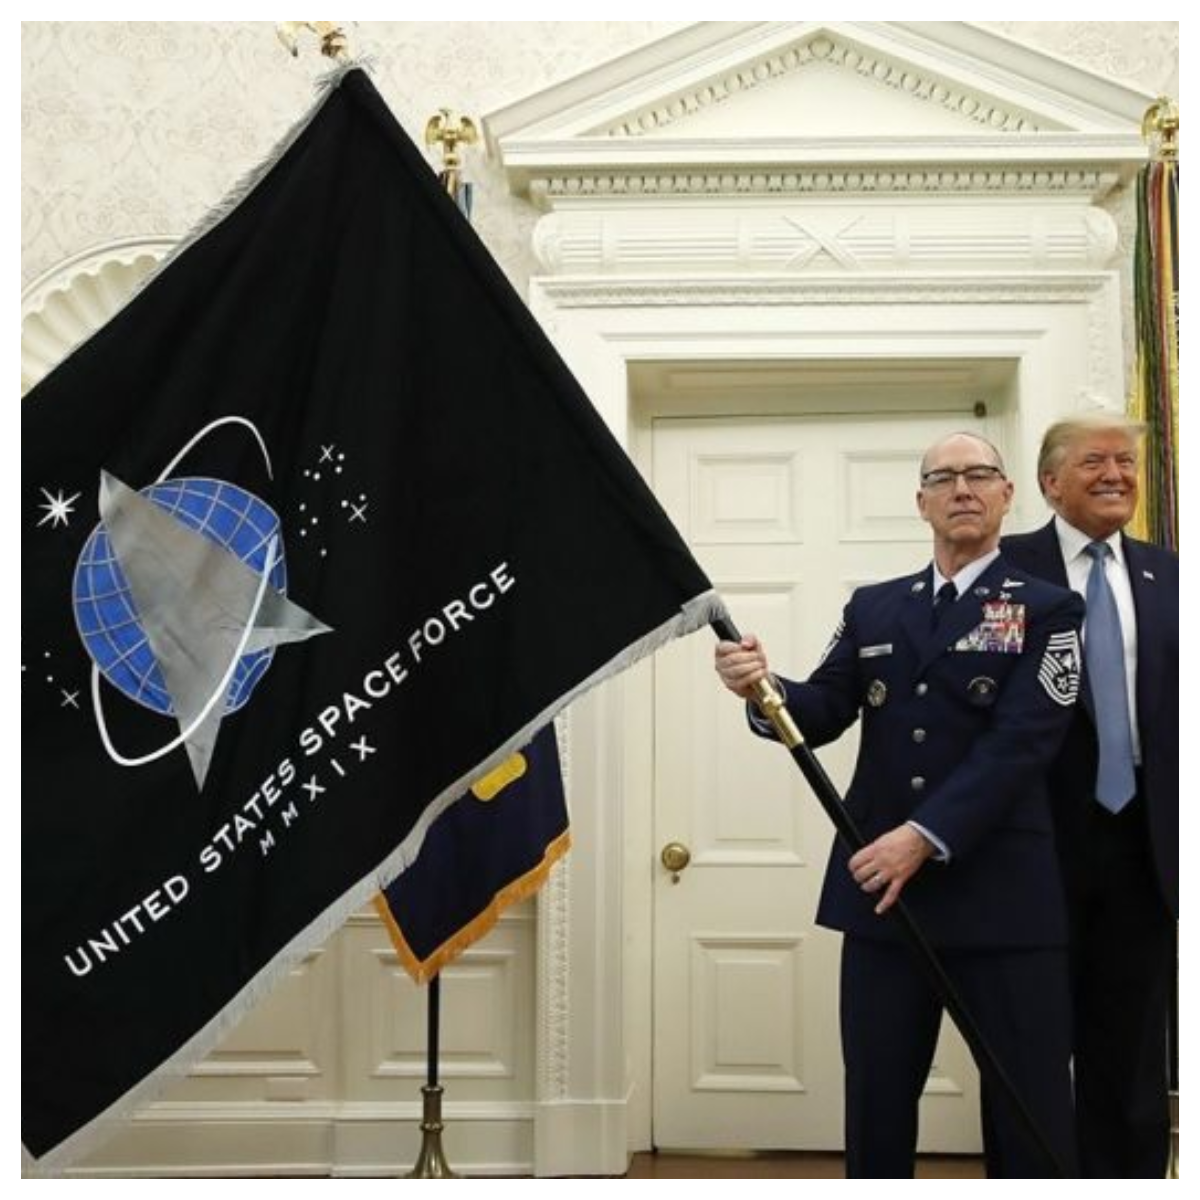 President Trump at unveiling of Space Force Flag, 15 May 2020. (White House photo)